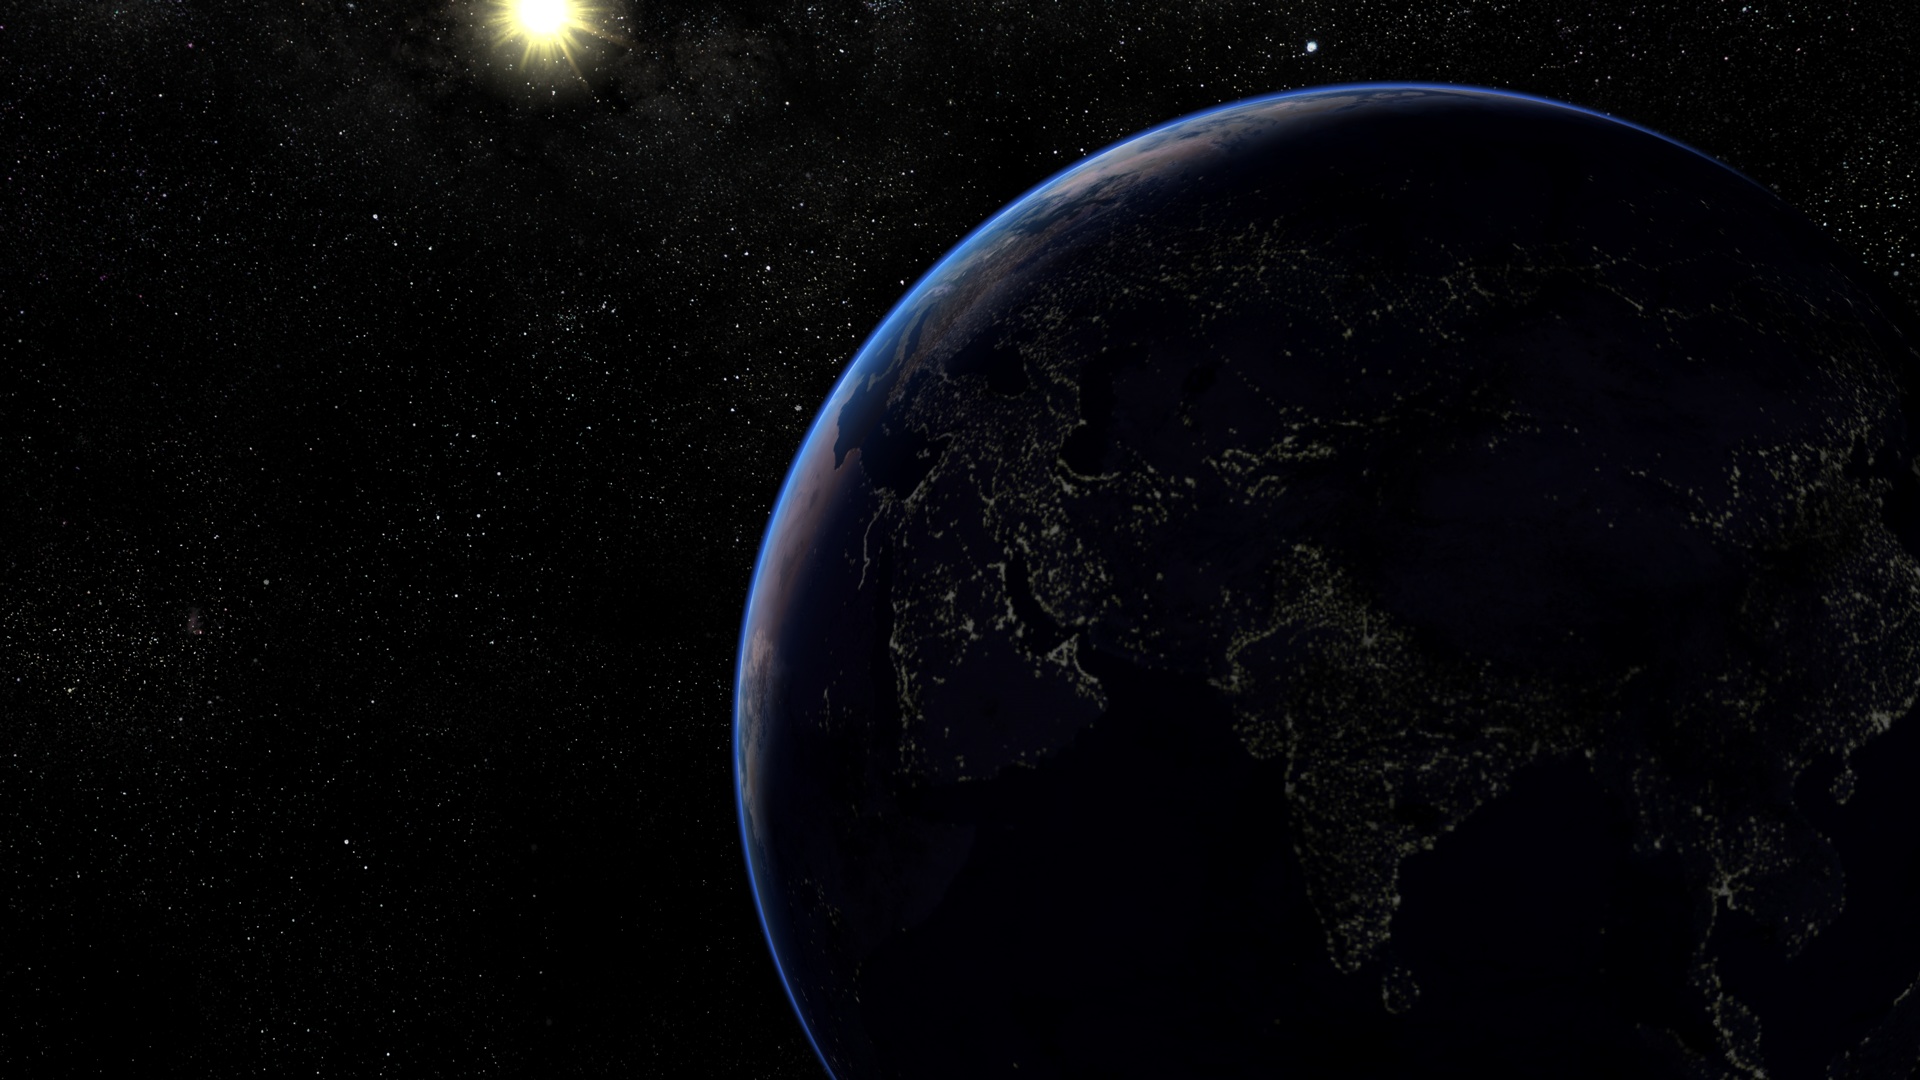 outer space, stars, planets, Earth, Planet Earth, city lights - desktop wallpaper